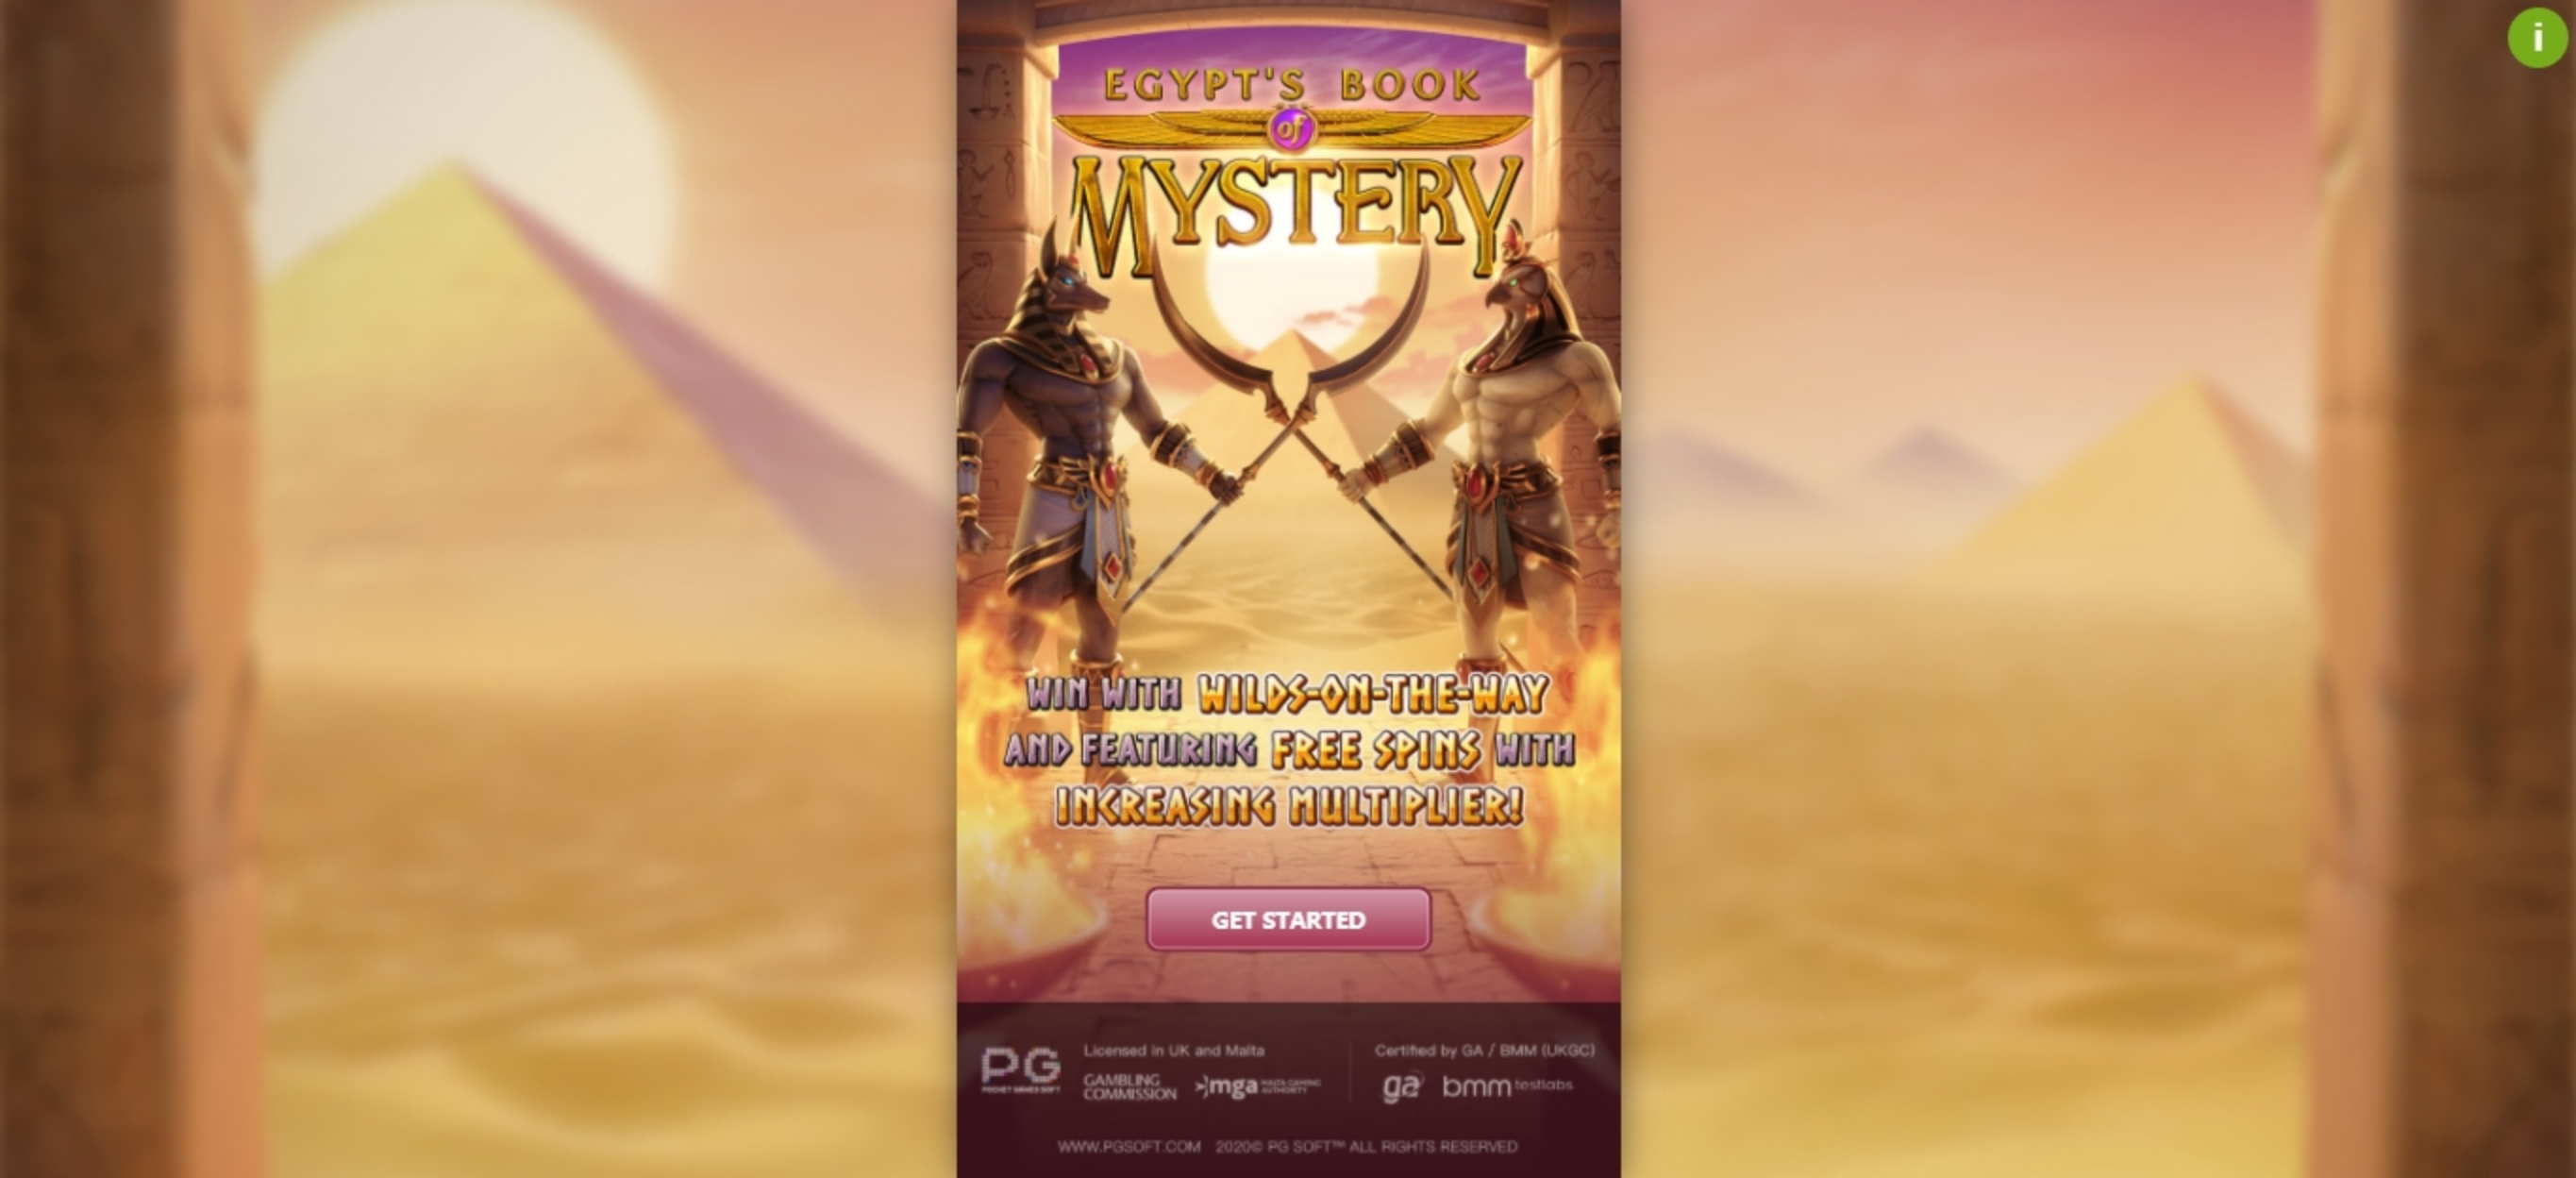 Play Egypts Book of Mystery Free Casino Slot Game by PG Soft